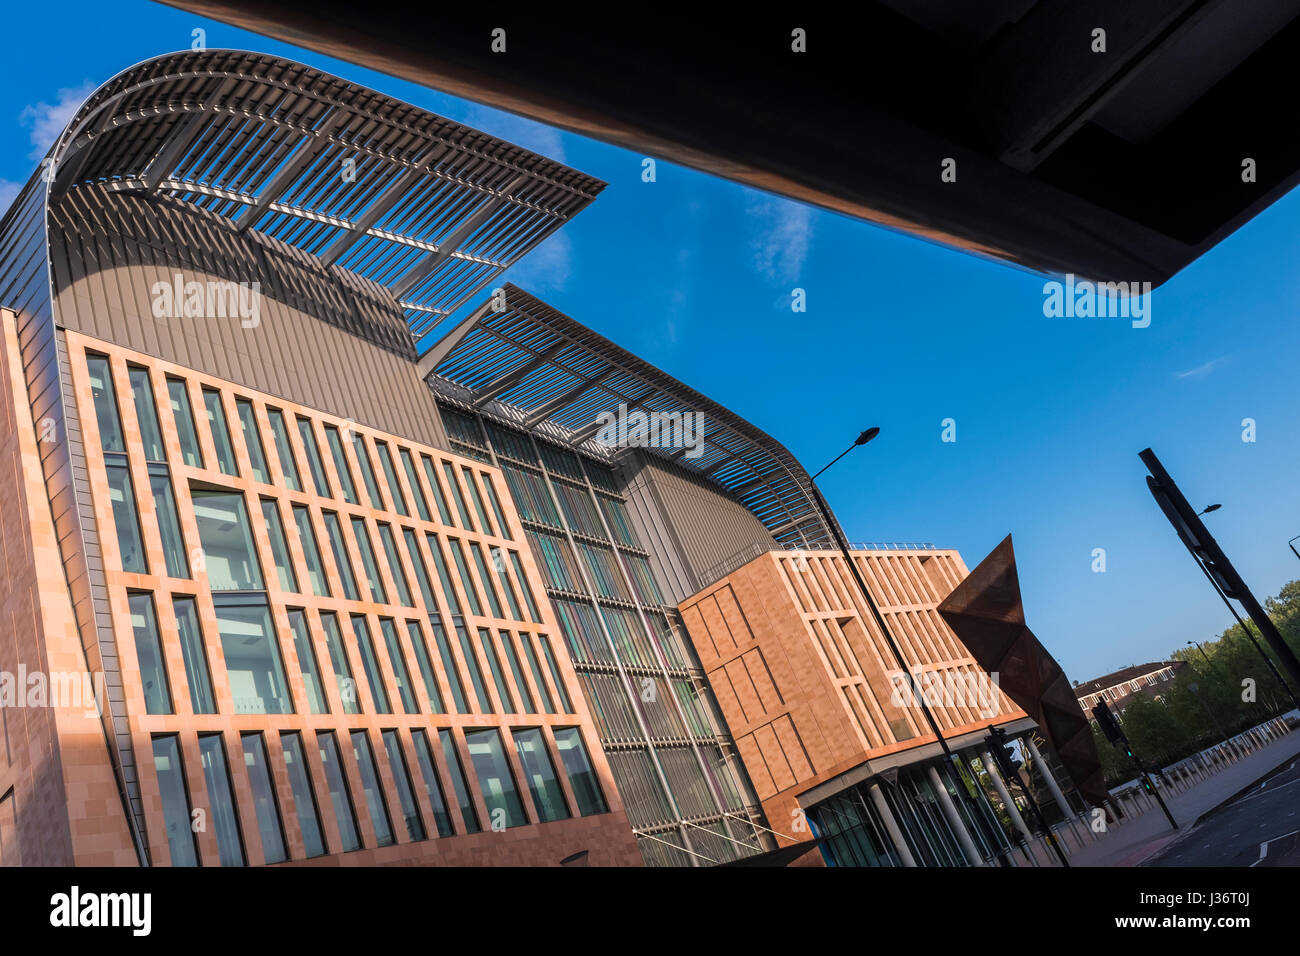 The Francis Crick Institute is a building next to St Pancras International railway station in the Borough of Camden, London, England, U.K. Stock Photo